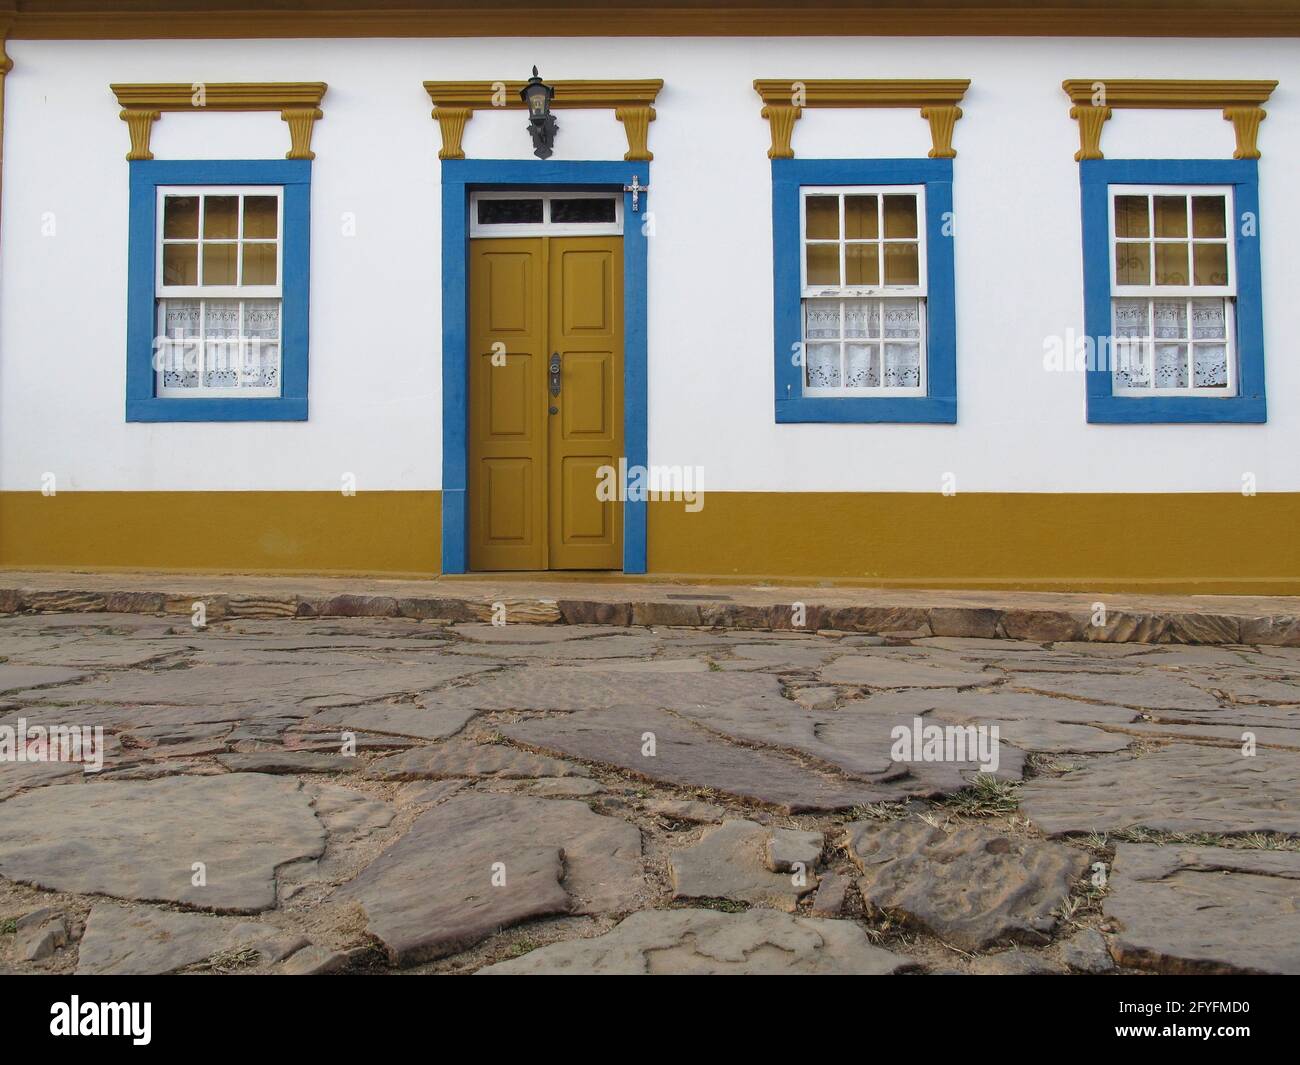 Tiradentes, Minas Gerais, Brazil - July 07, 2018: houses and characteristic architecture in the city historic Tiradentes, interior of Minas Gerais Stock Photo